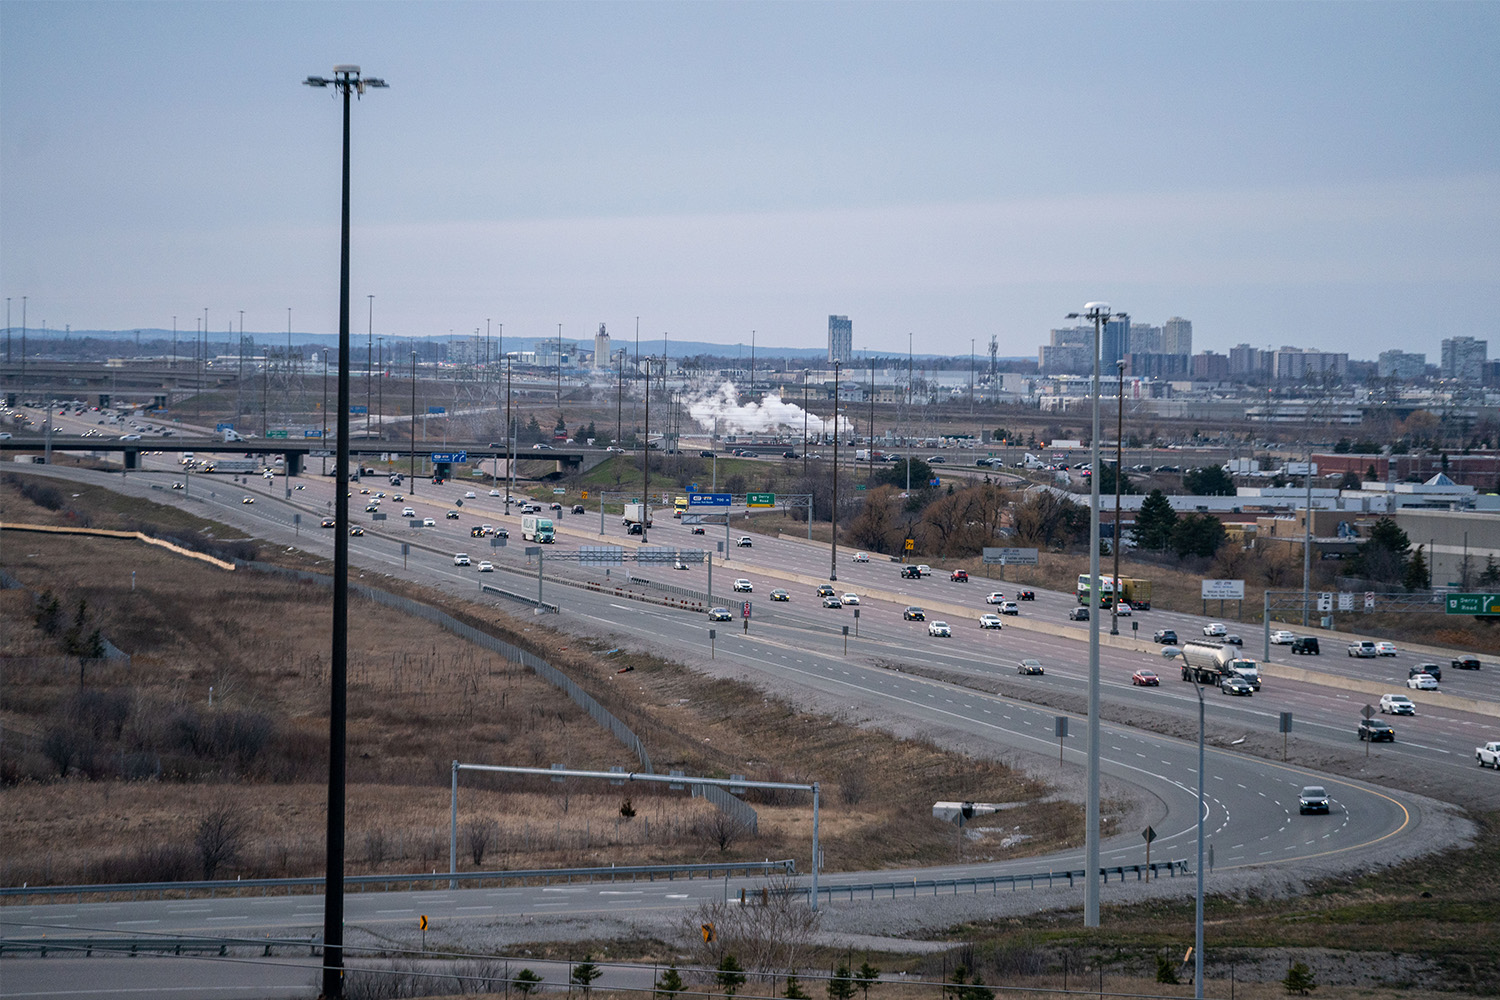 On cold days, smoke and steam can be seen billowing into the air from various facilities along this stretch of industrial Mississauga.